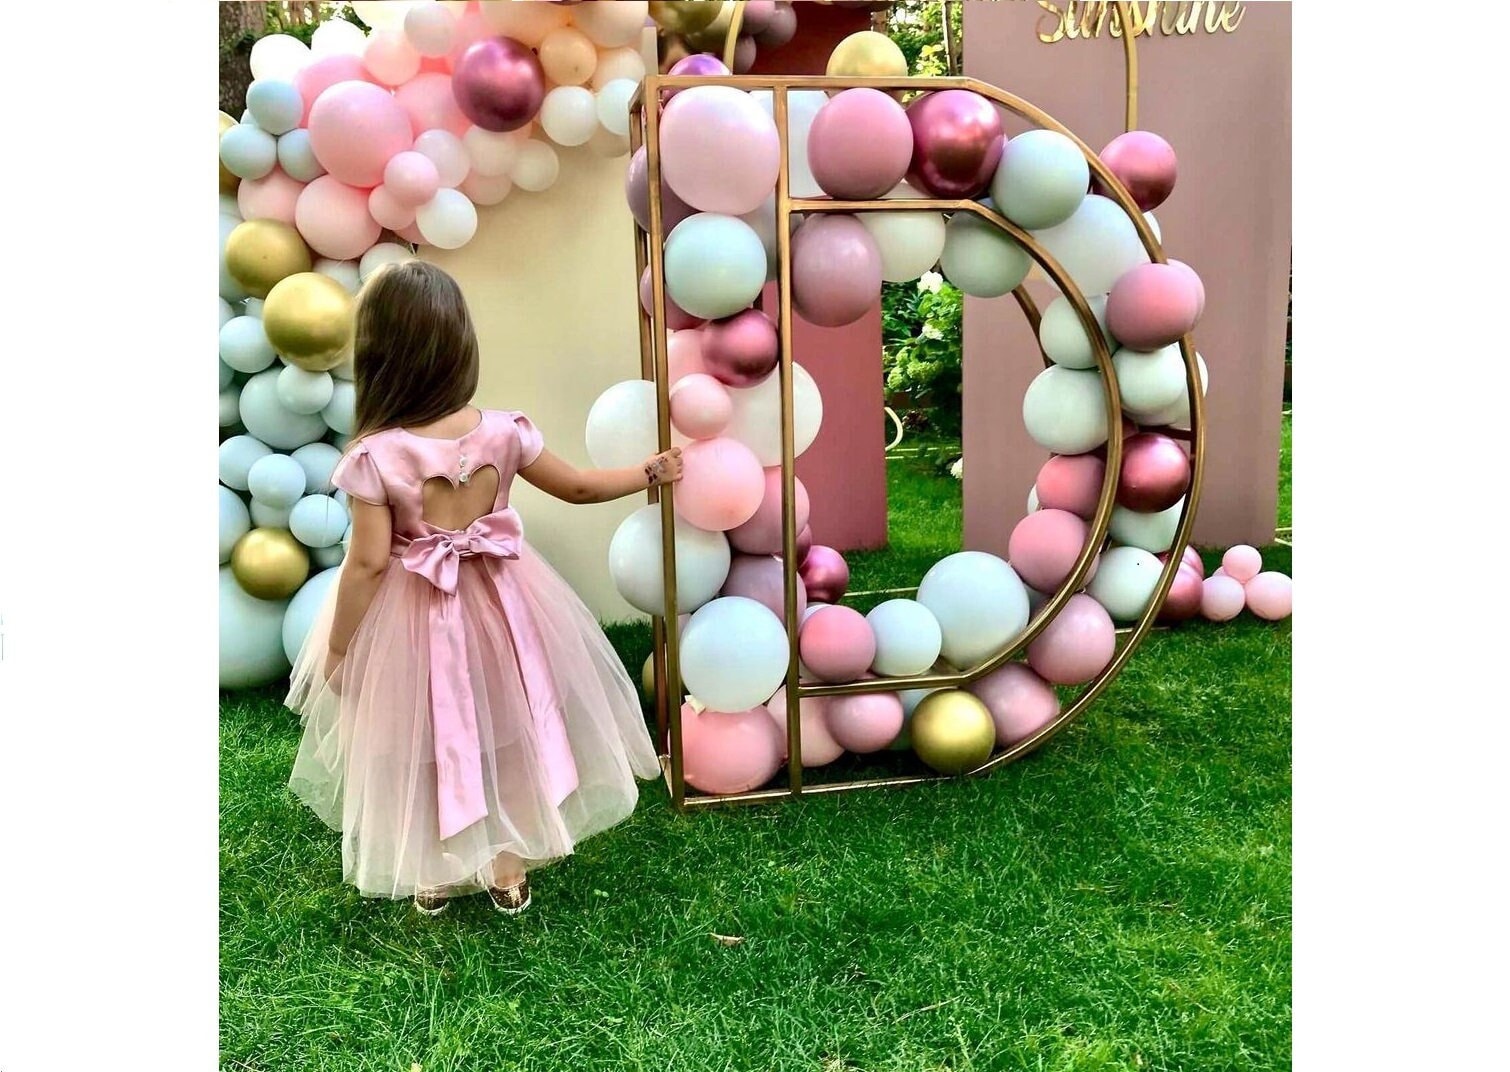  4FT/120cm Marquee Light Up Numbers/Letters Mosaic Numbers Frame  for Balloons Large Cardboard Letters/Number for Birthday Anniversary Party  Decor (Color : Letter V) : Home & Kitchen